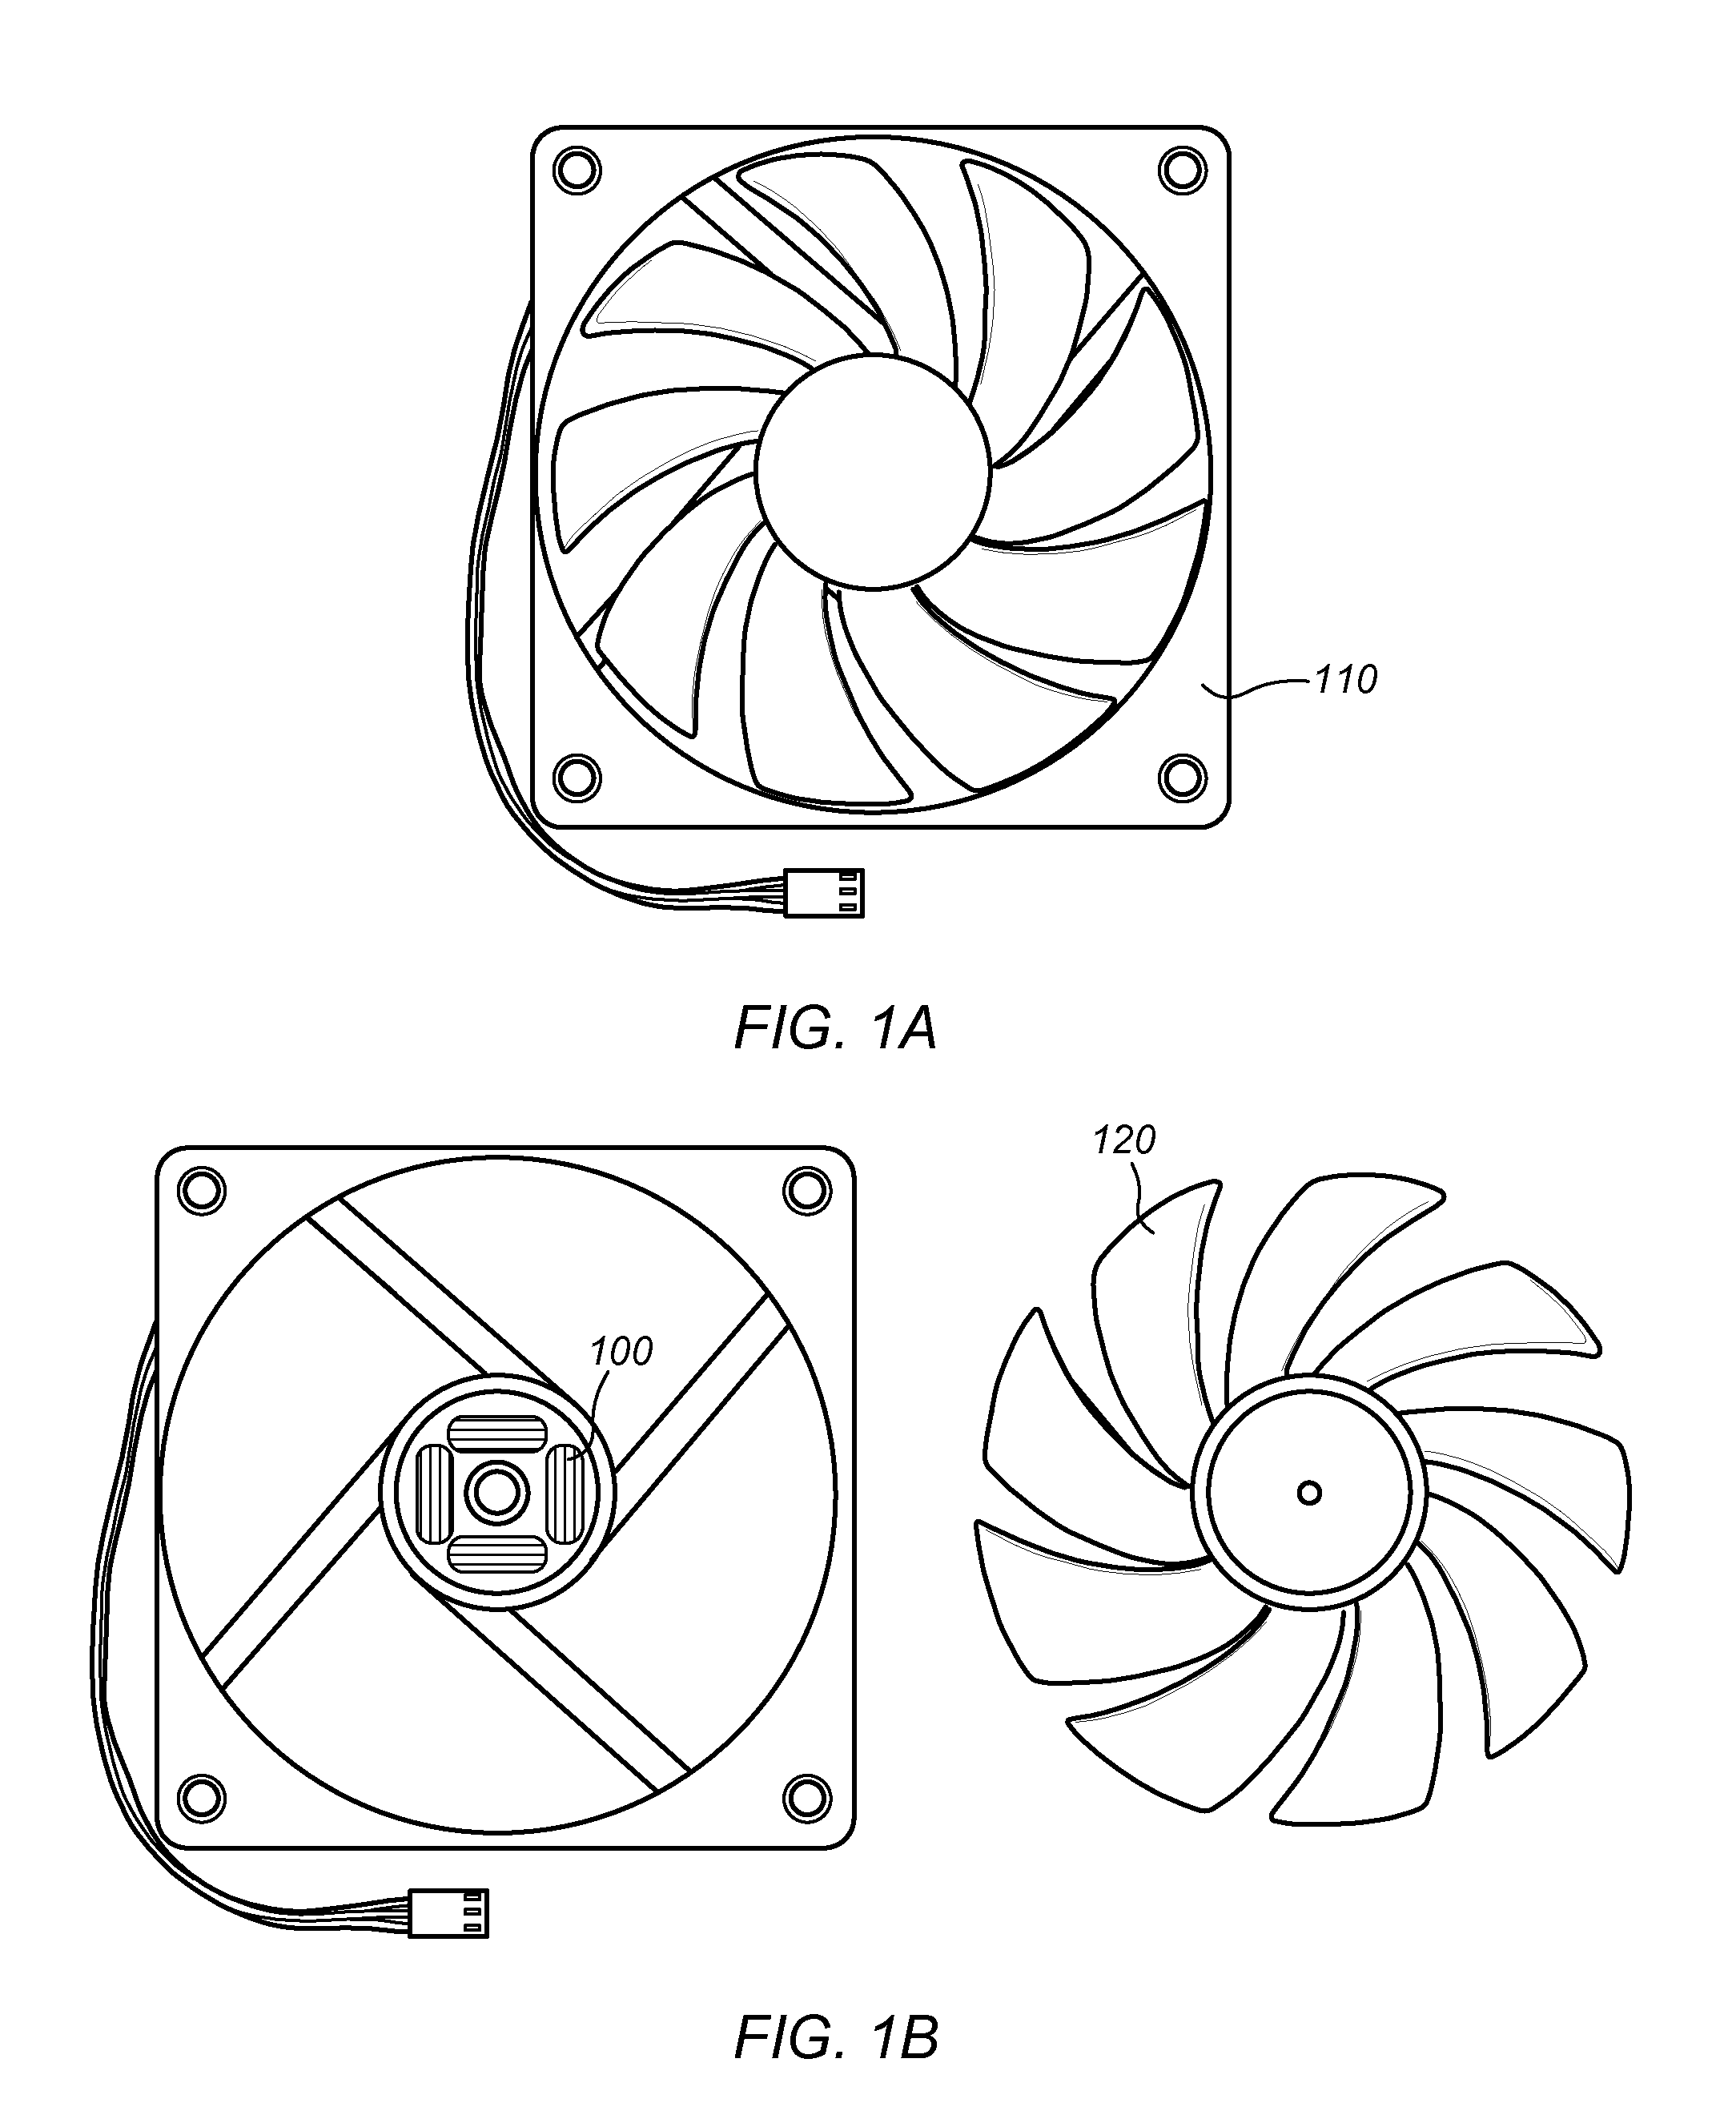 System and Method for Inducing Rotation of a Rotor in a Sensorless Motor